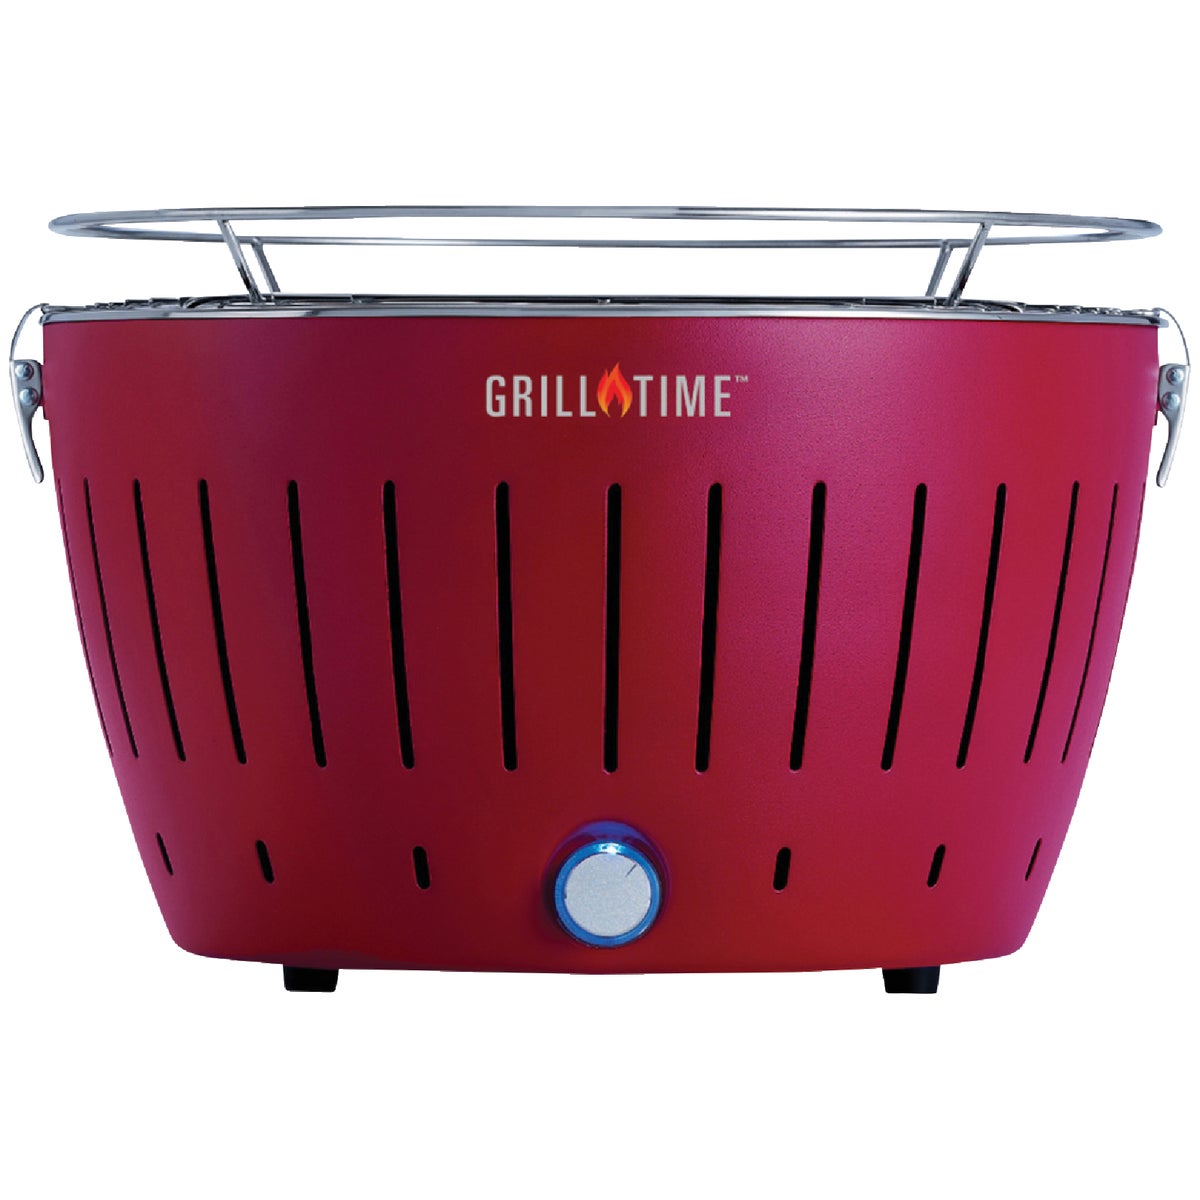 Grill Time Tailgater GT Red 124 Sq. In. Charcoal Portable Grill